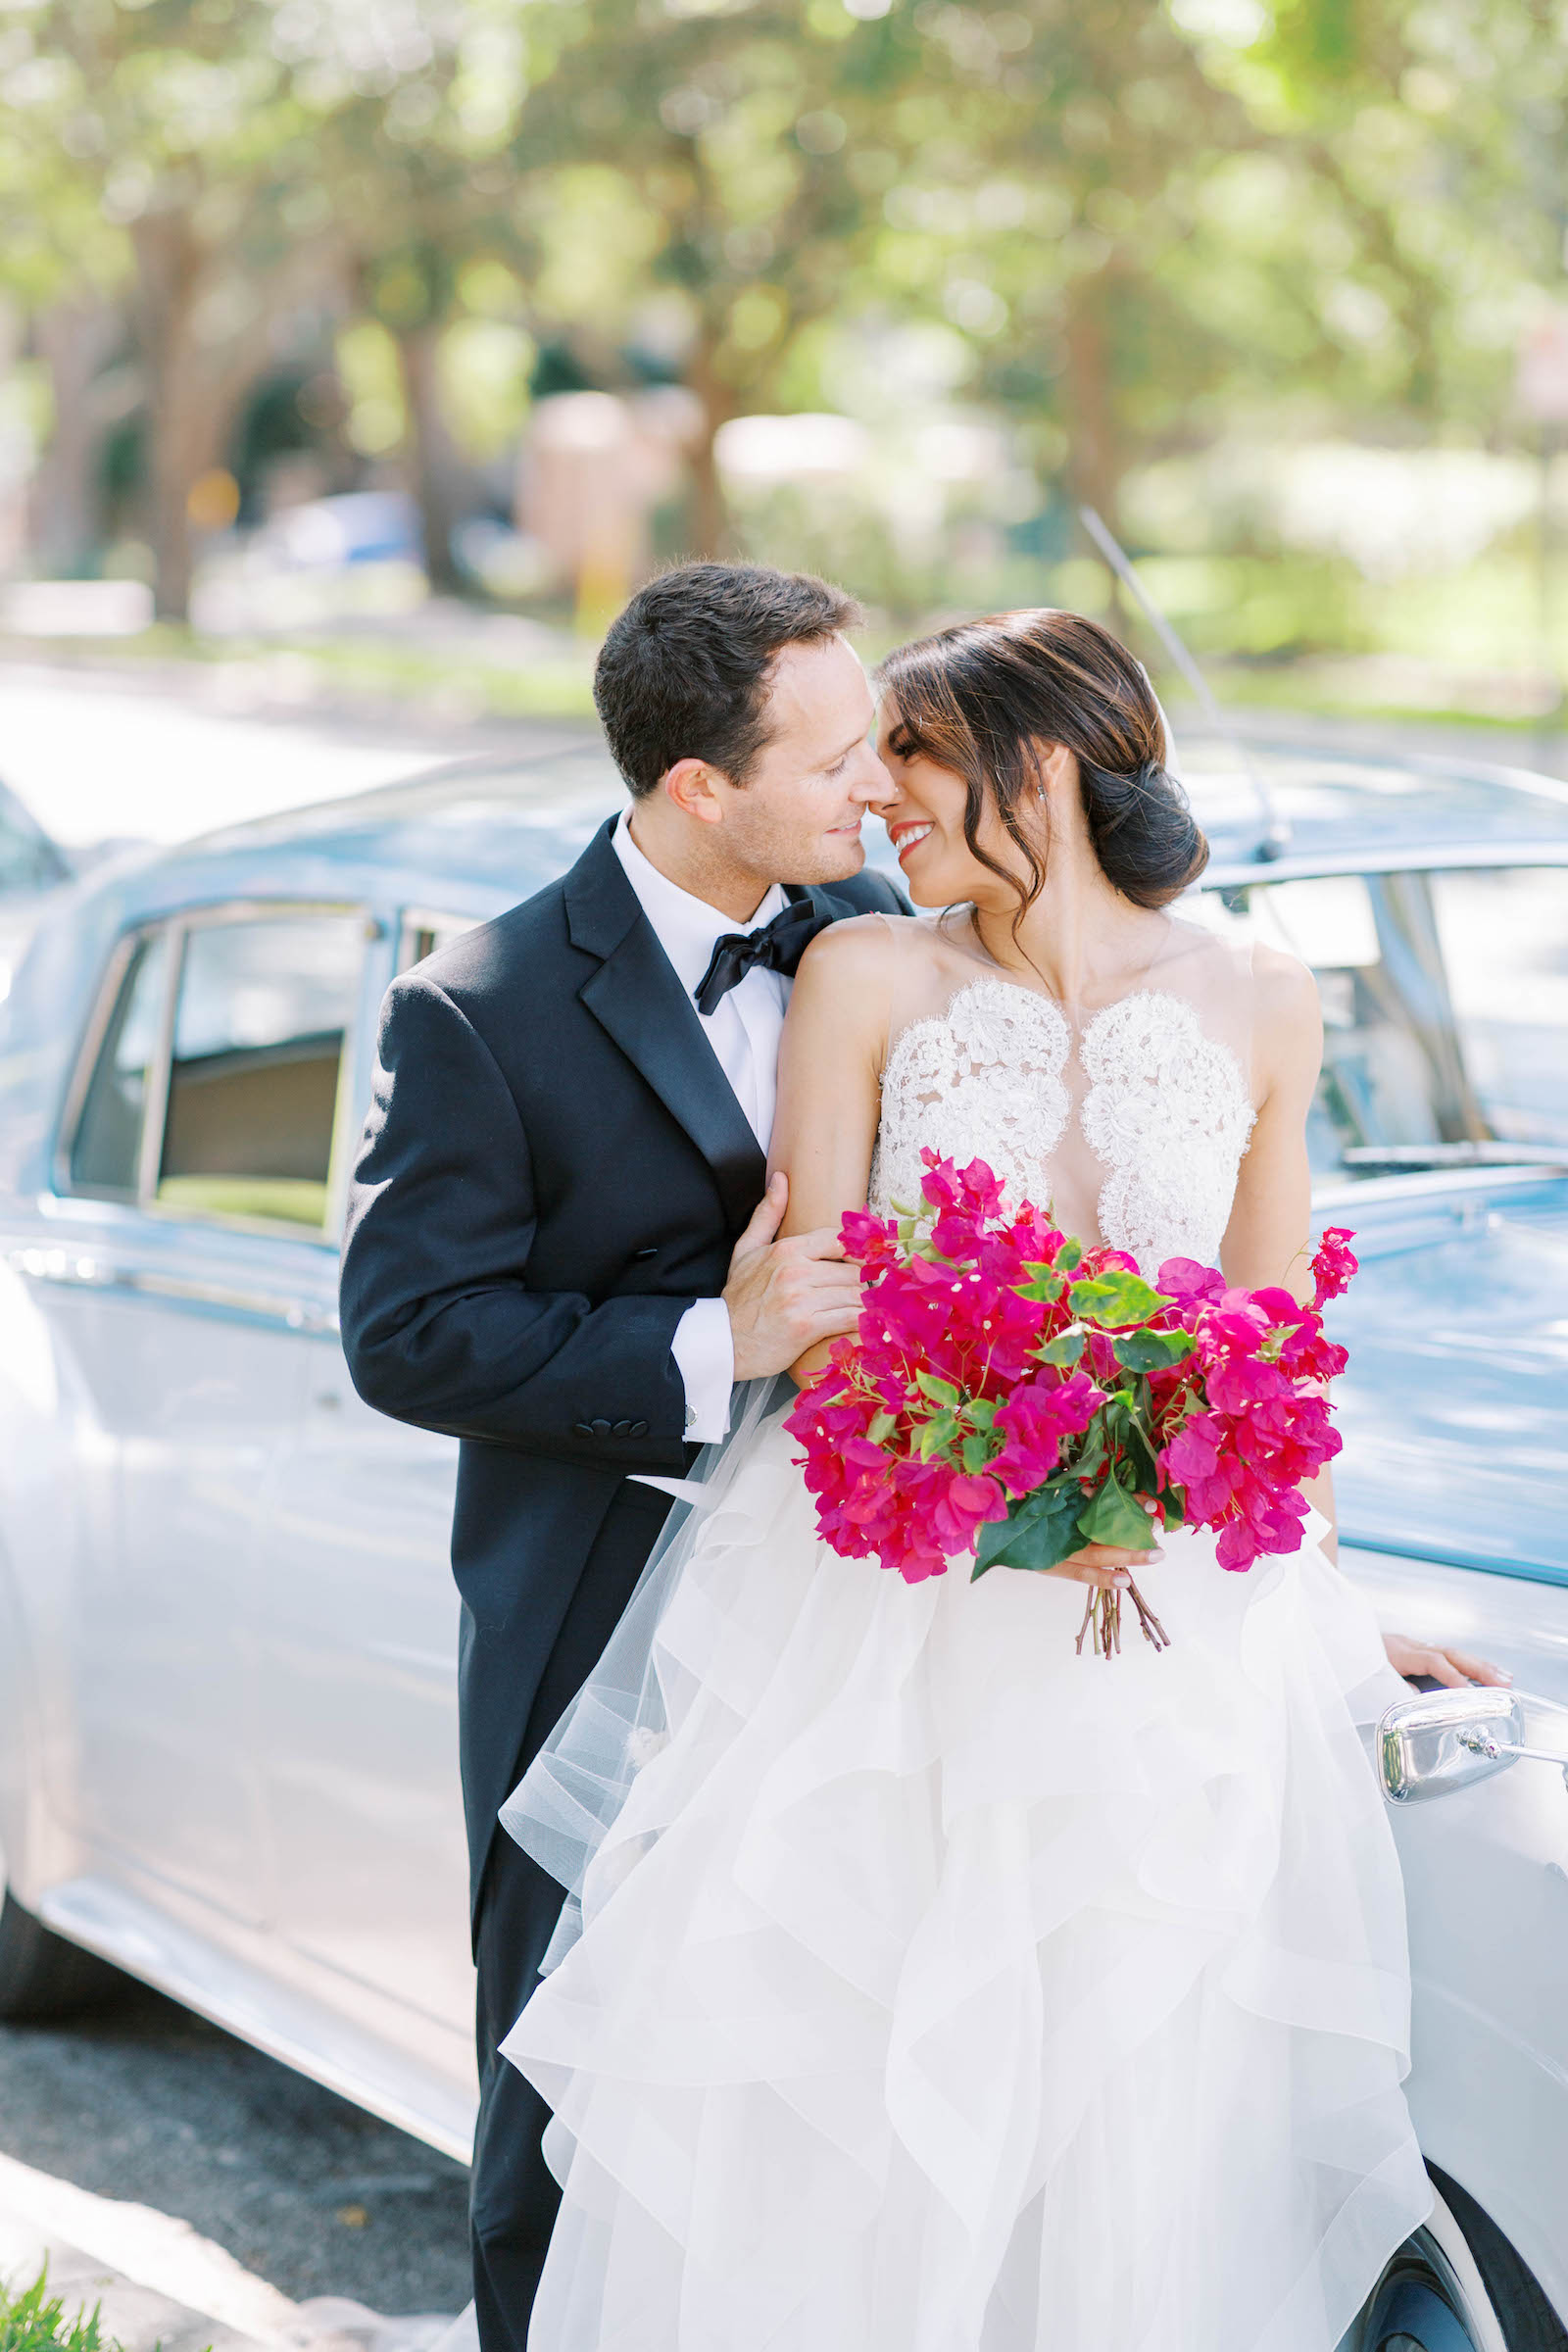 Bride and Groom Wedding Portrait with Vintage Car and Fuchsia Pink Bouquet